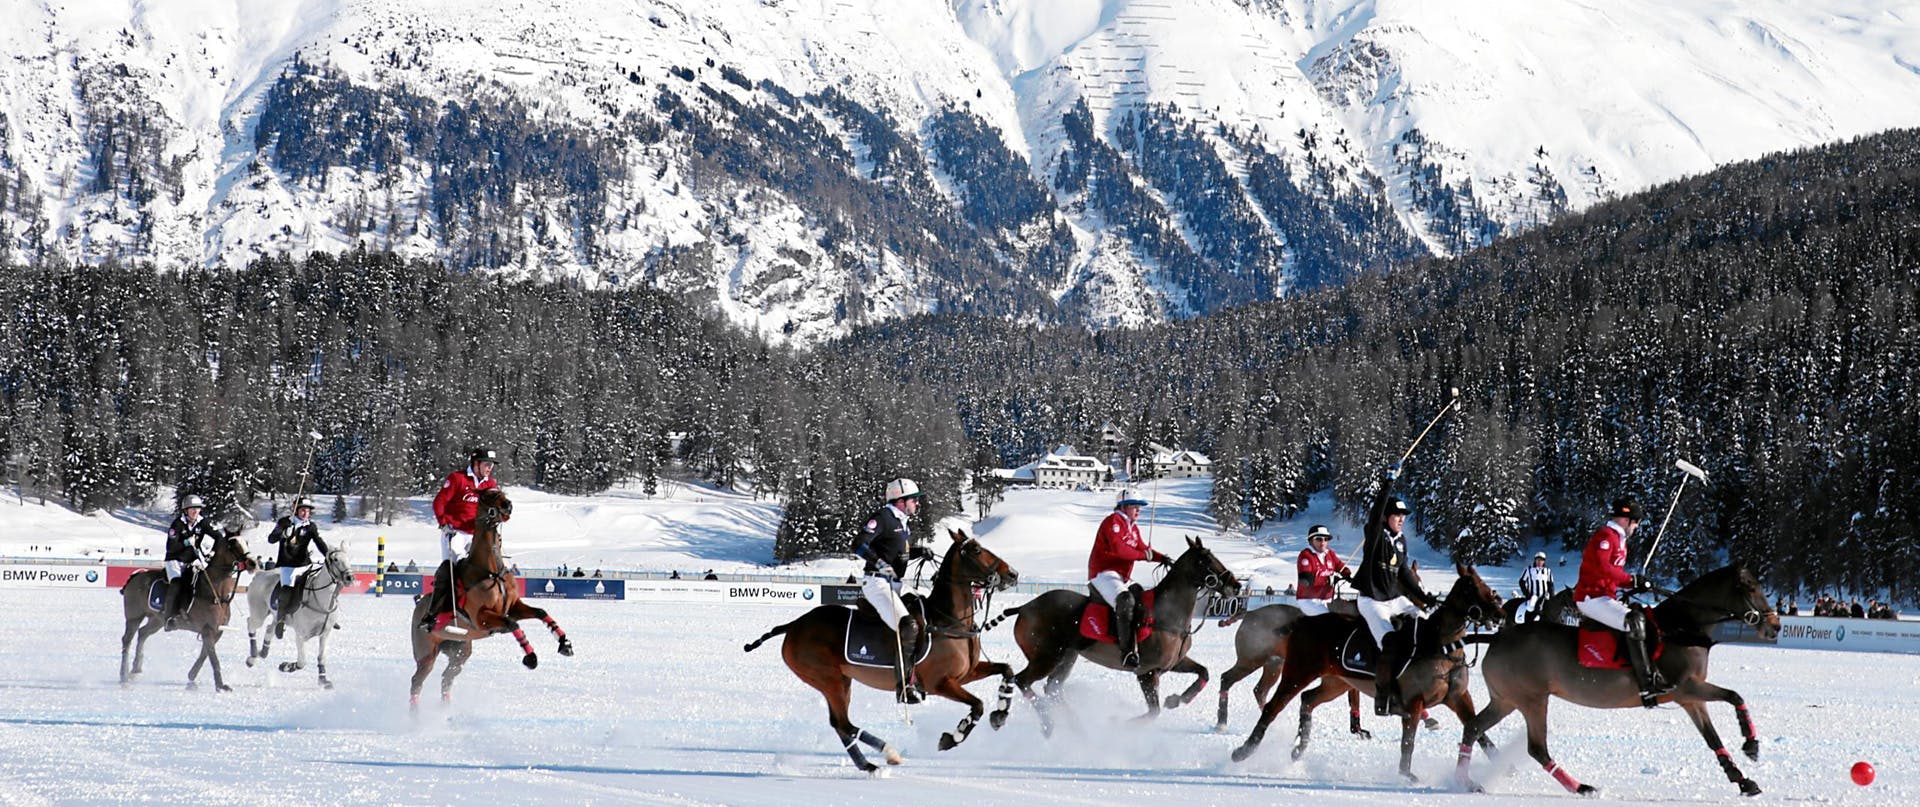 polo auf schnee wintersport polo st. moritz st. moritz sport snow polo st. moritz engadin engadine winter human person animal mammal horse equestrian people